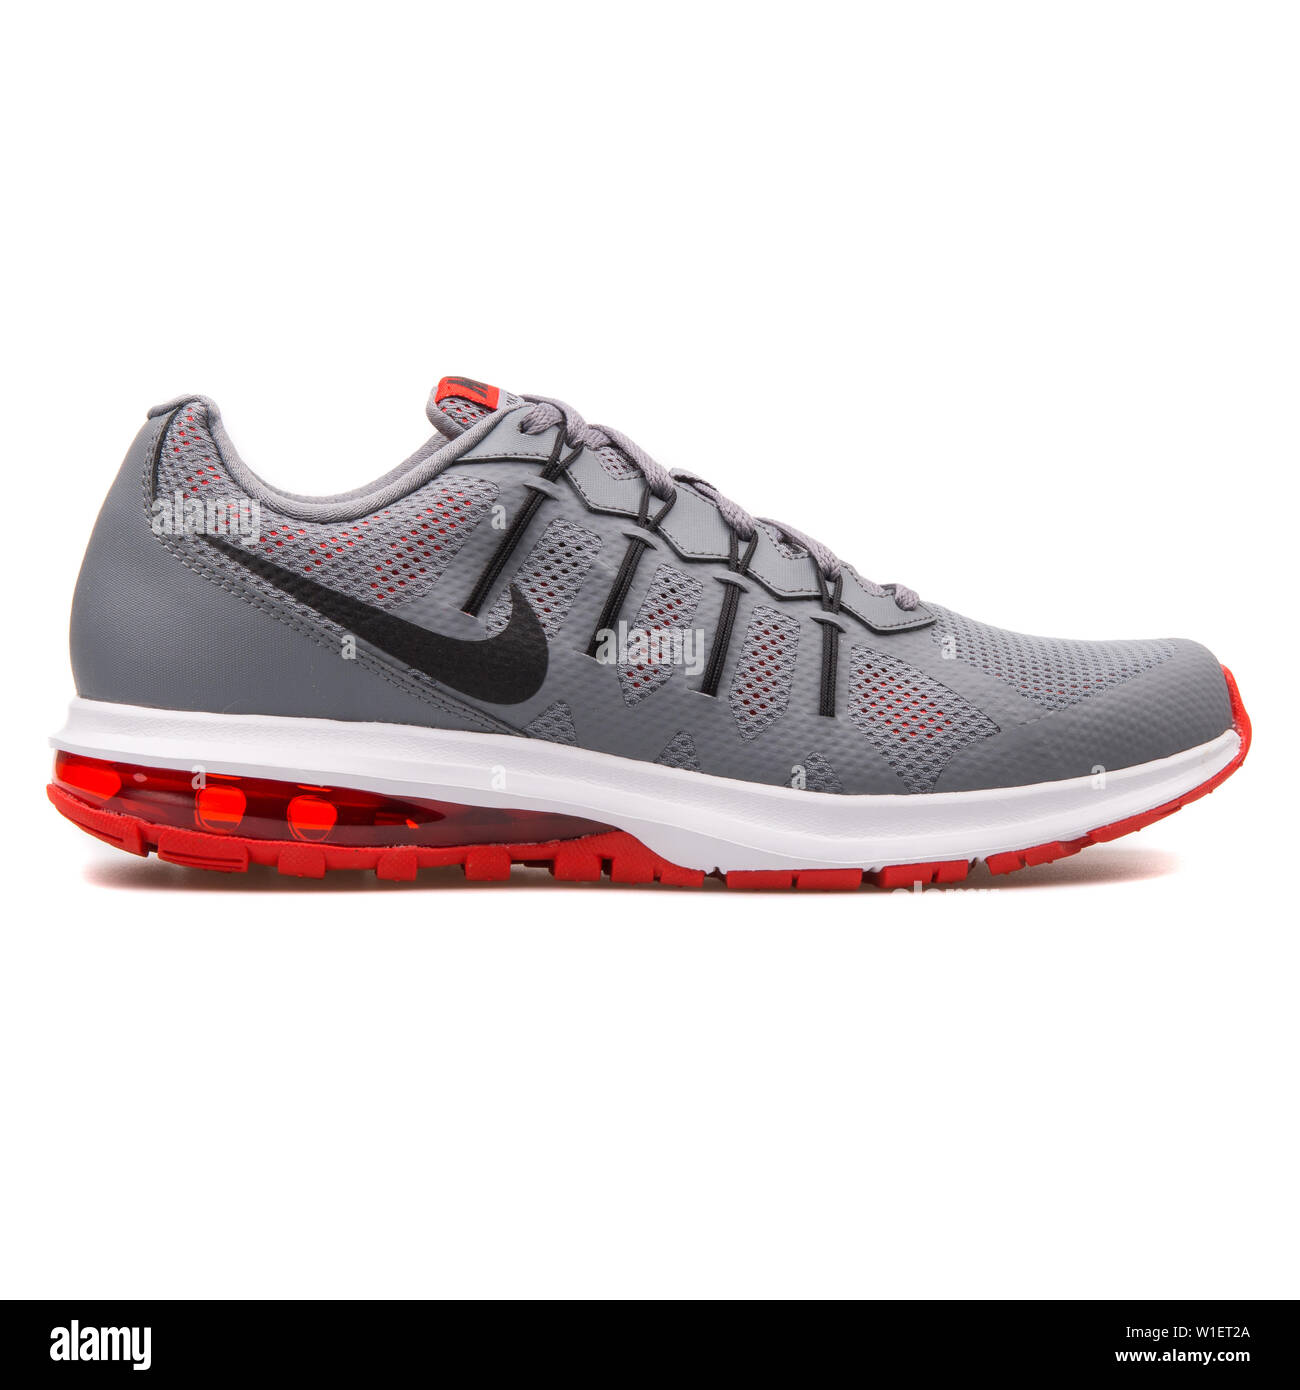 VIENNA, - AUGUST 10, 2017: Nike Air Max Dynasty grey and red sneaker on white background Stock Photo - Alamy